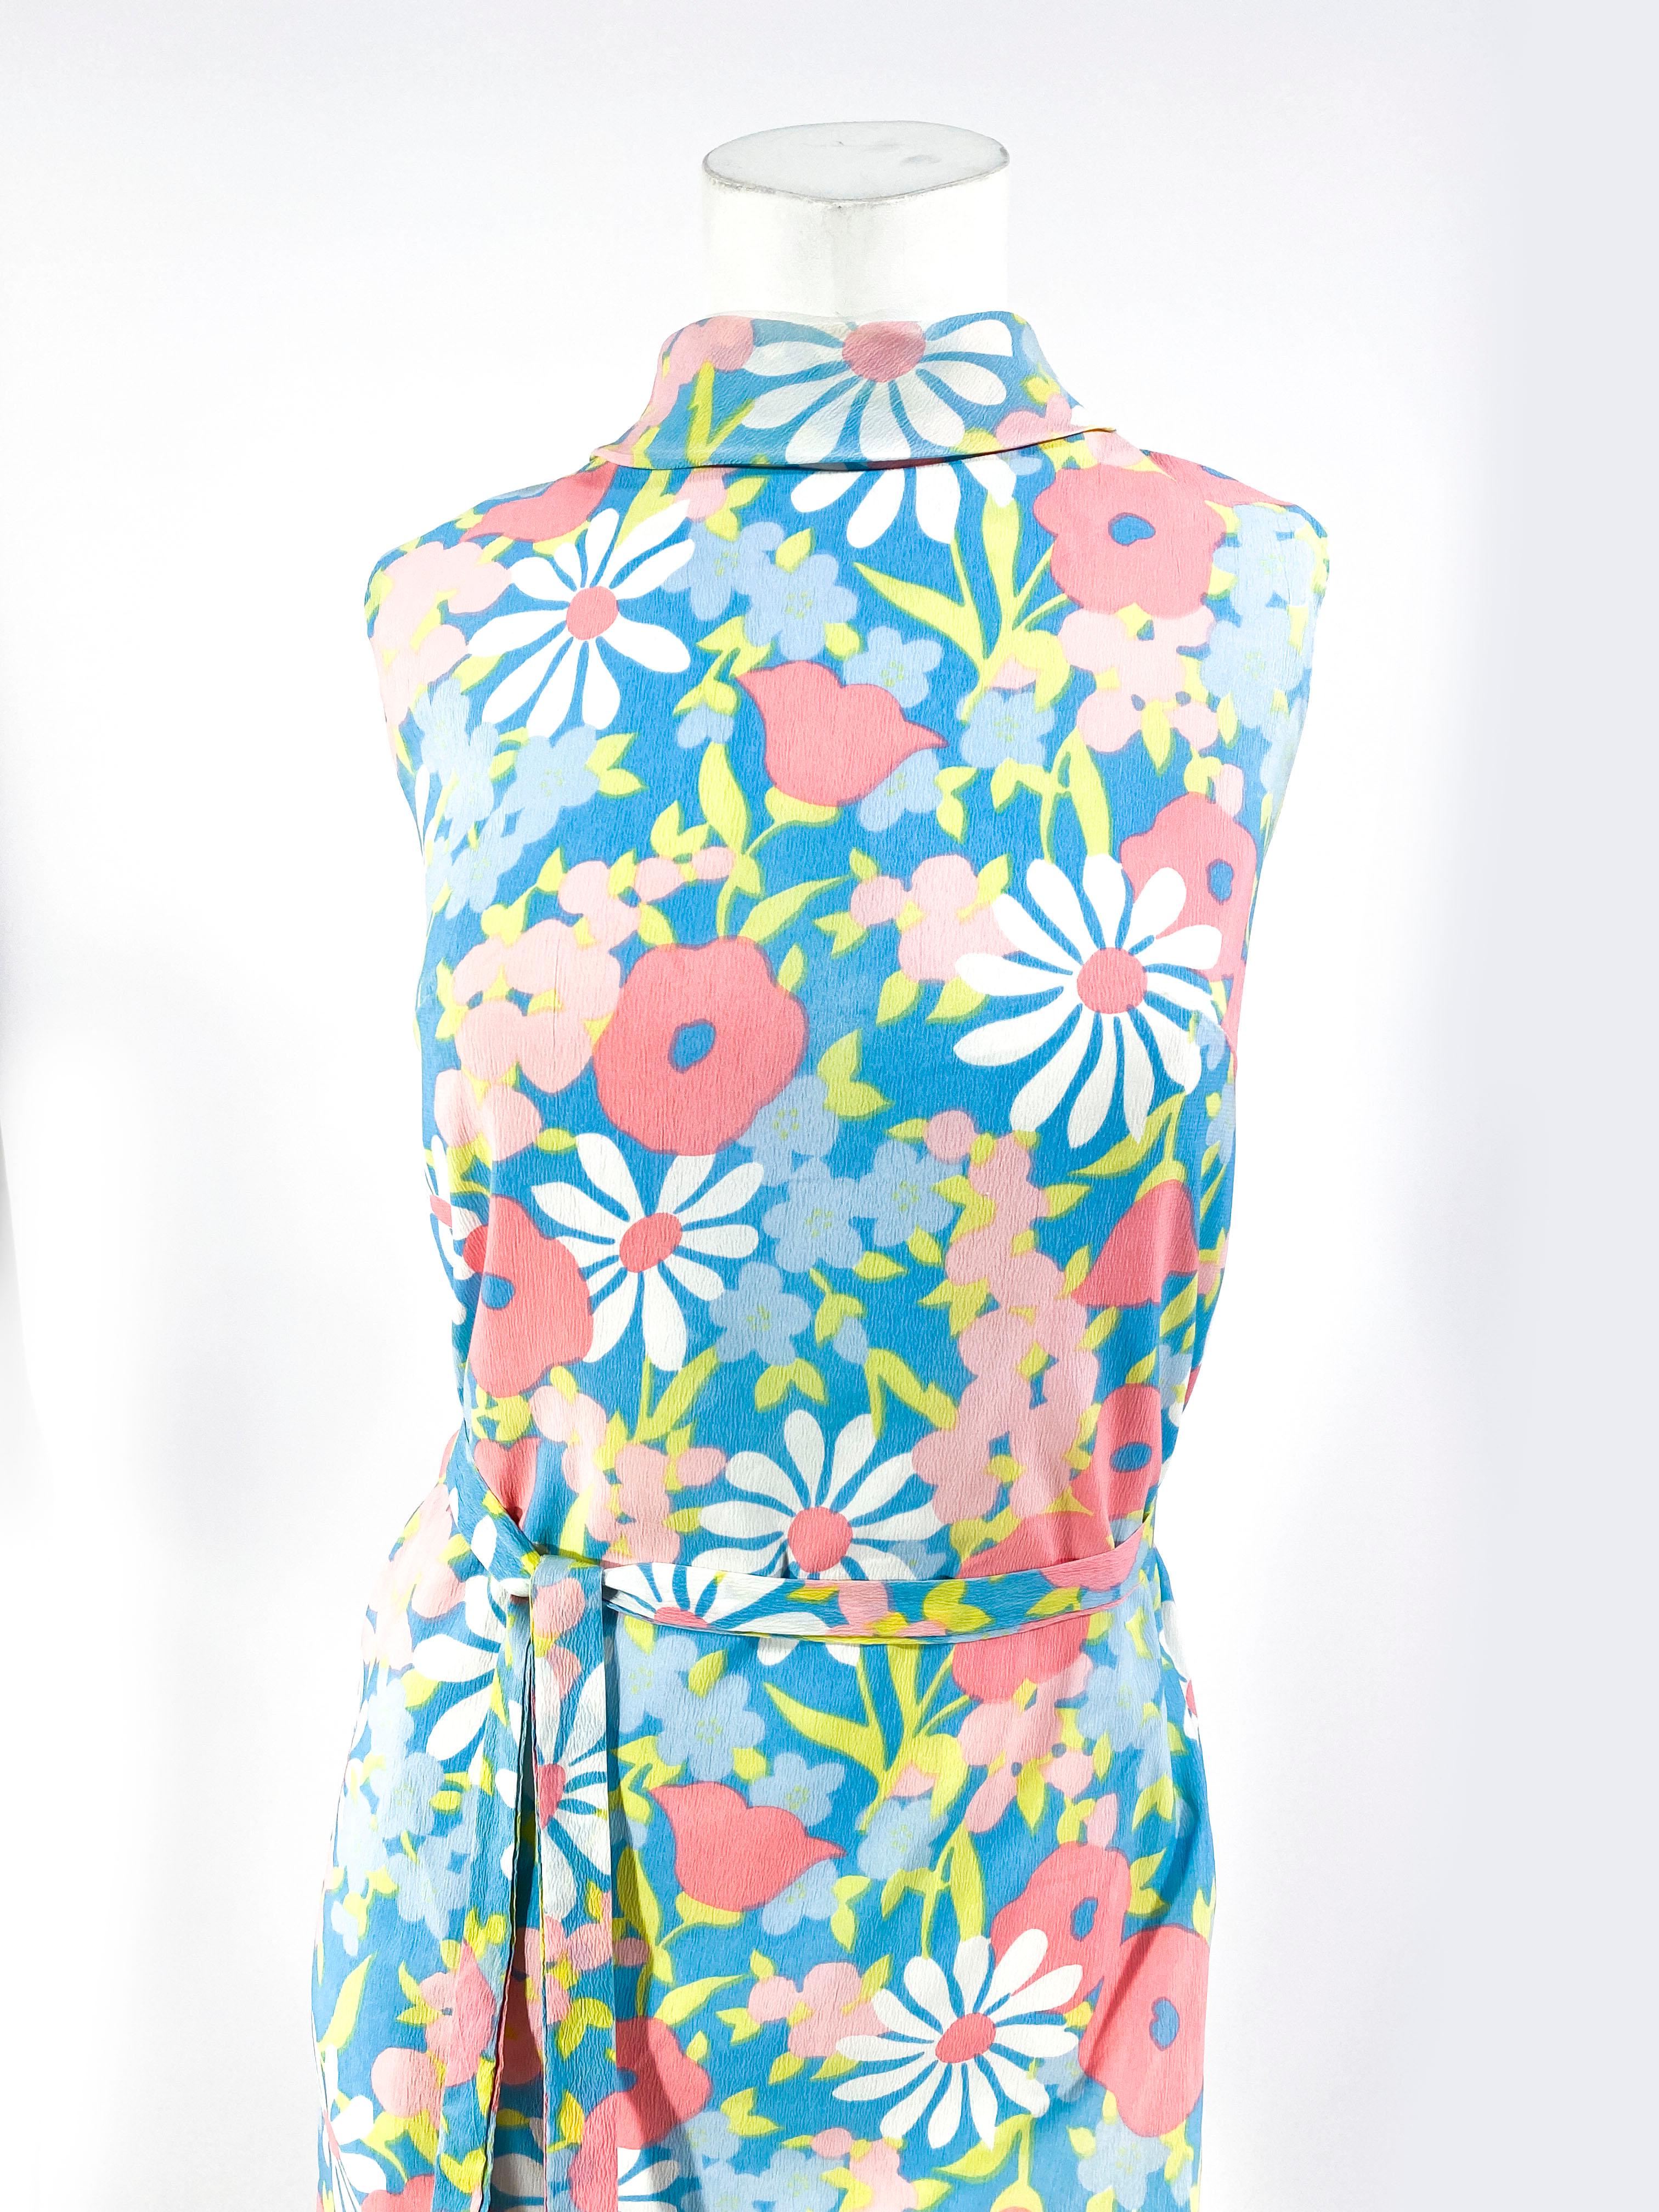 1960s flower printed shift dress made of a polyester crepe and a turtle-boat neckline. The dress is entirely lined with a back metal zipper closure and a matching sash.